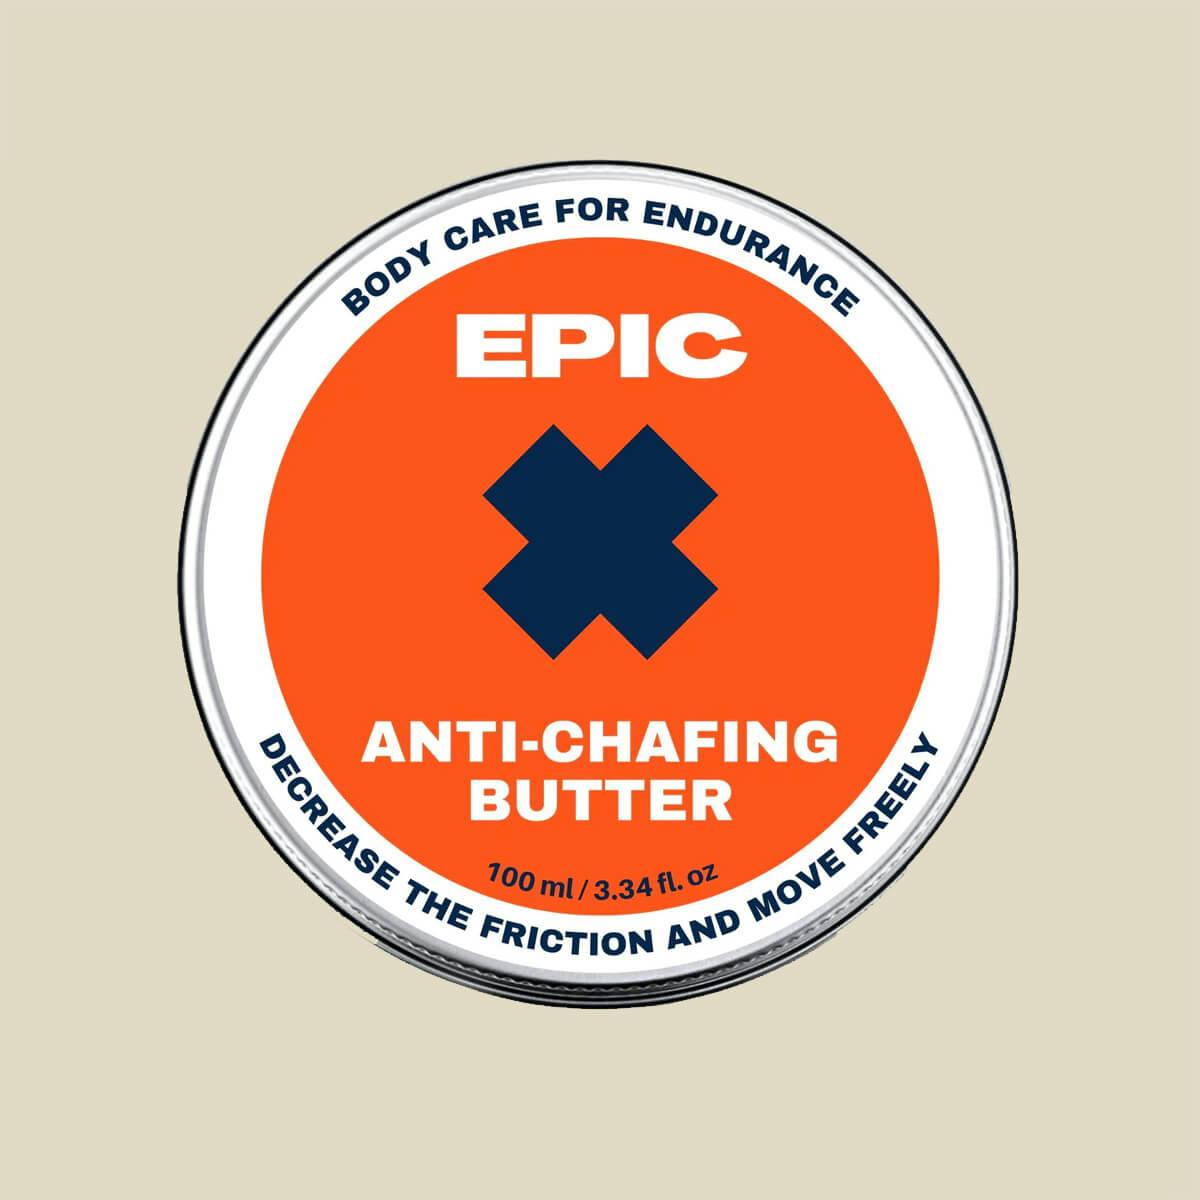 ANTI-CHAFING BUTTER - 100ml